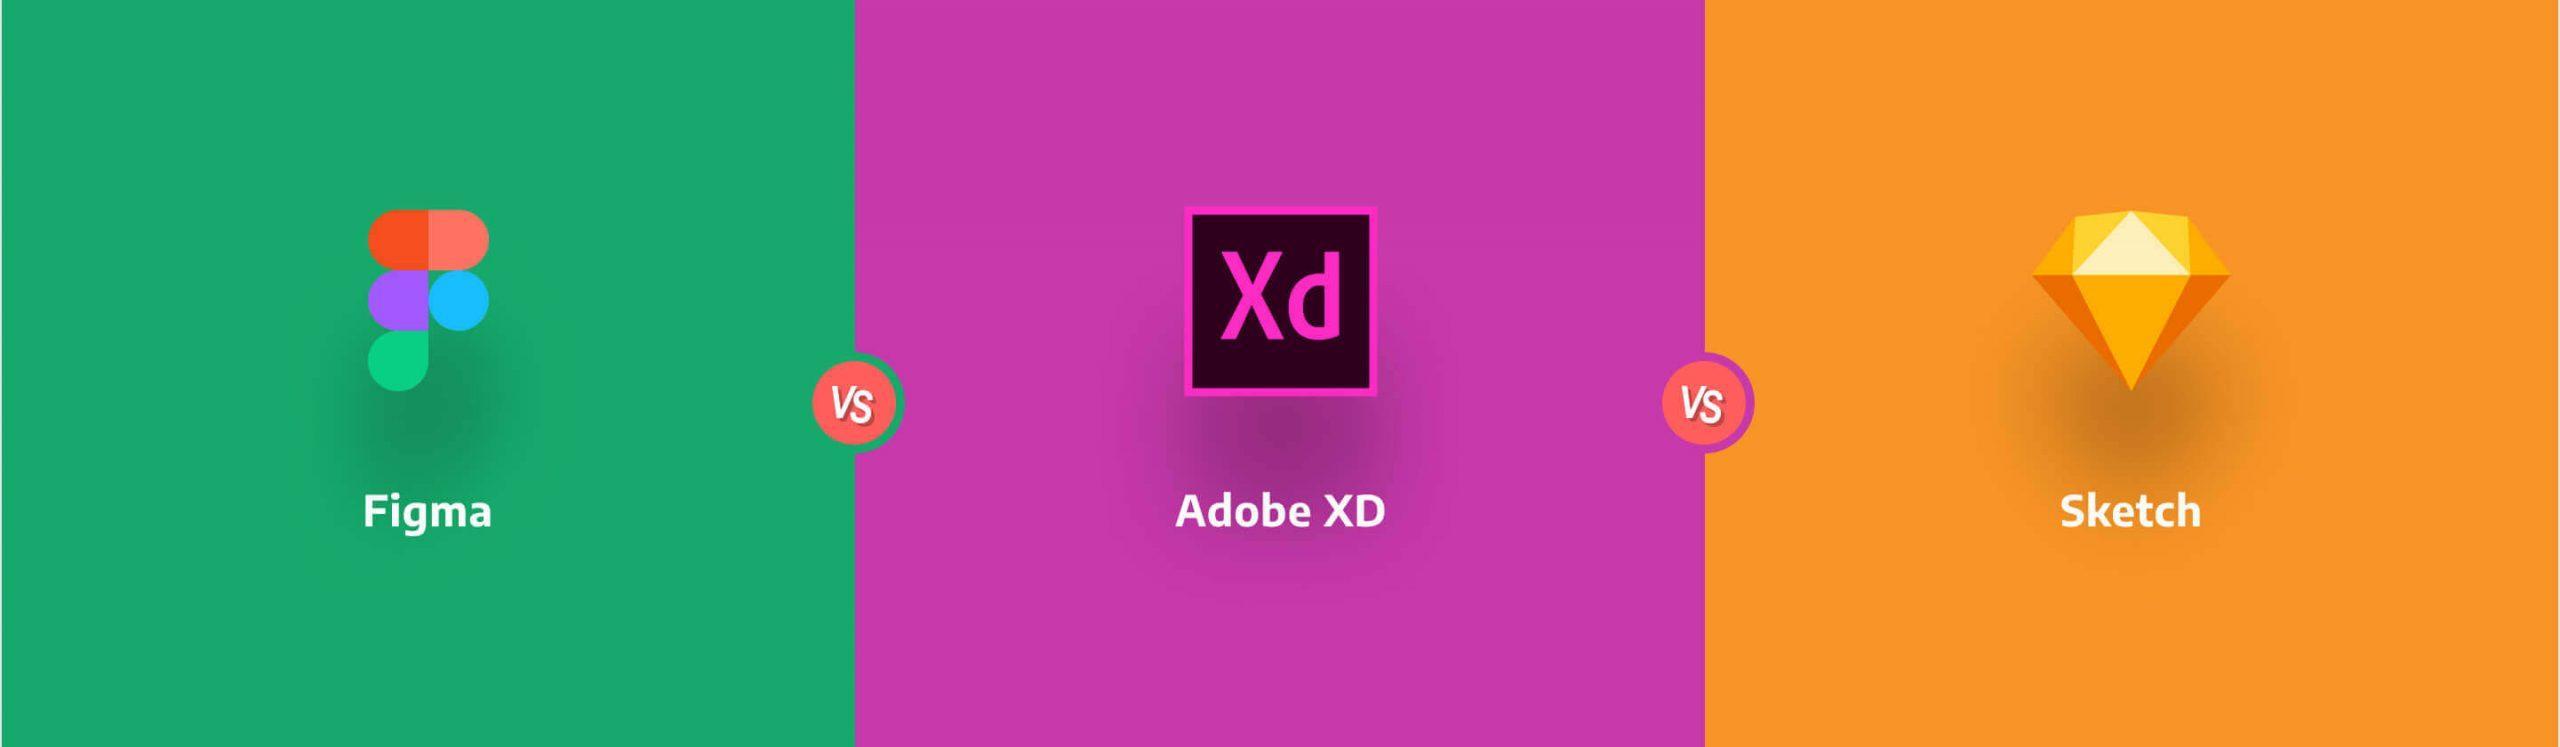 Sketch vs Figma vs Adobe XD Which Design Tool Is Best for Beginners   Design Shack